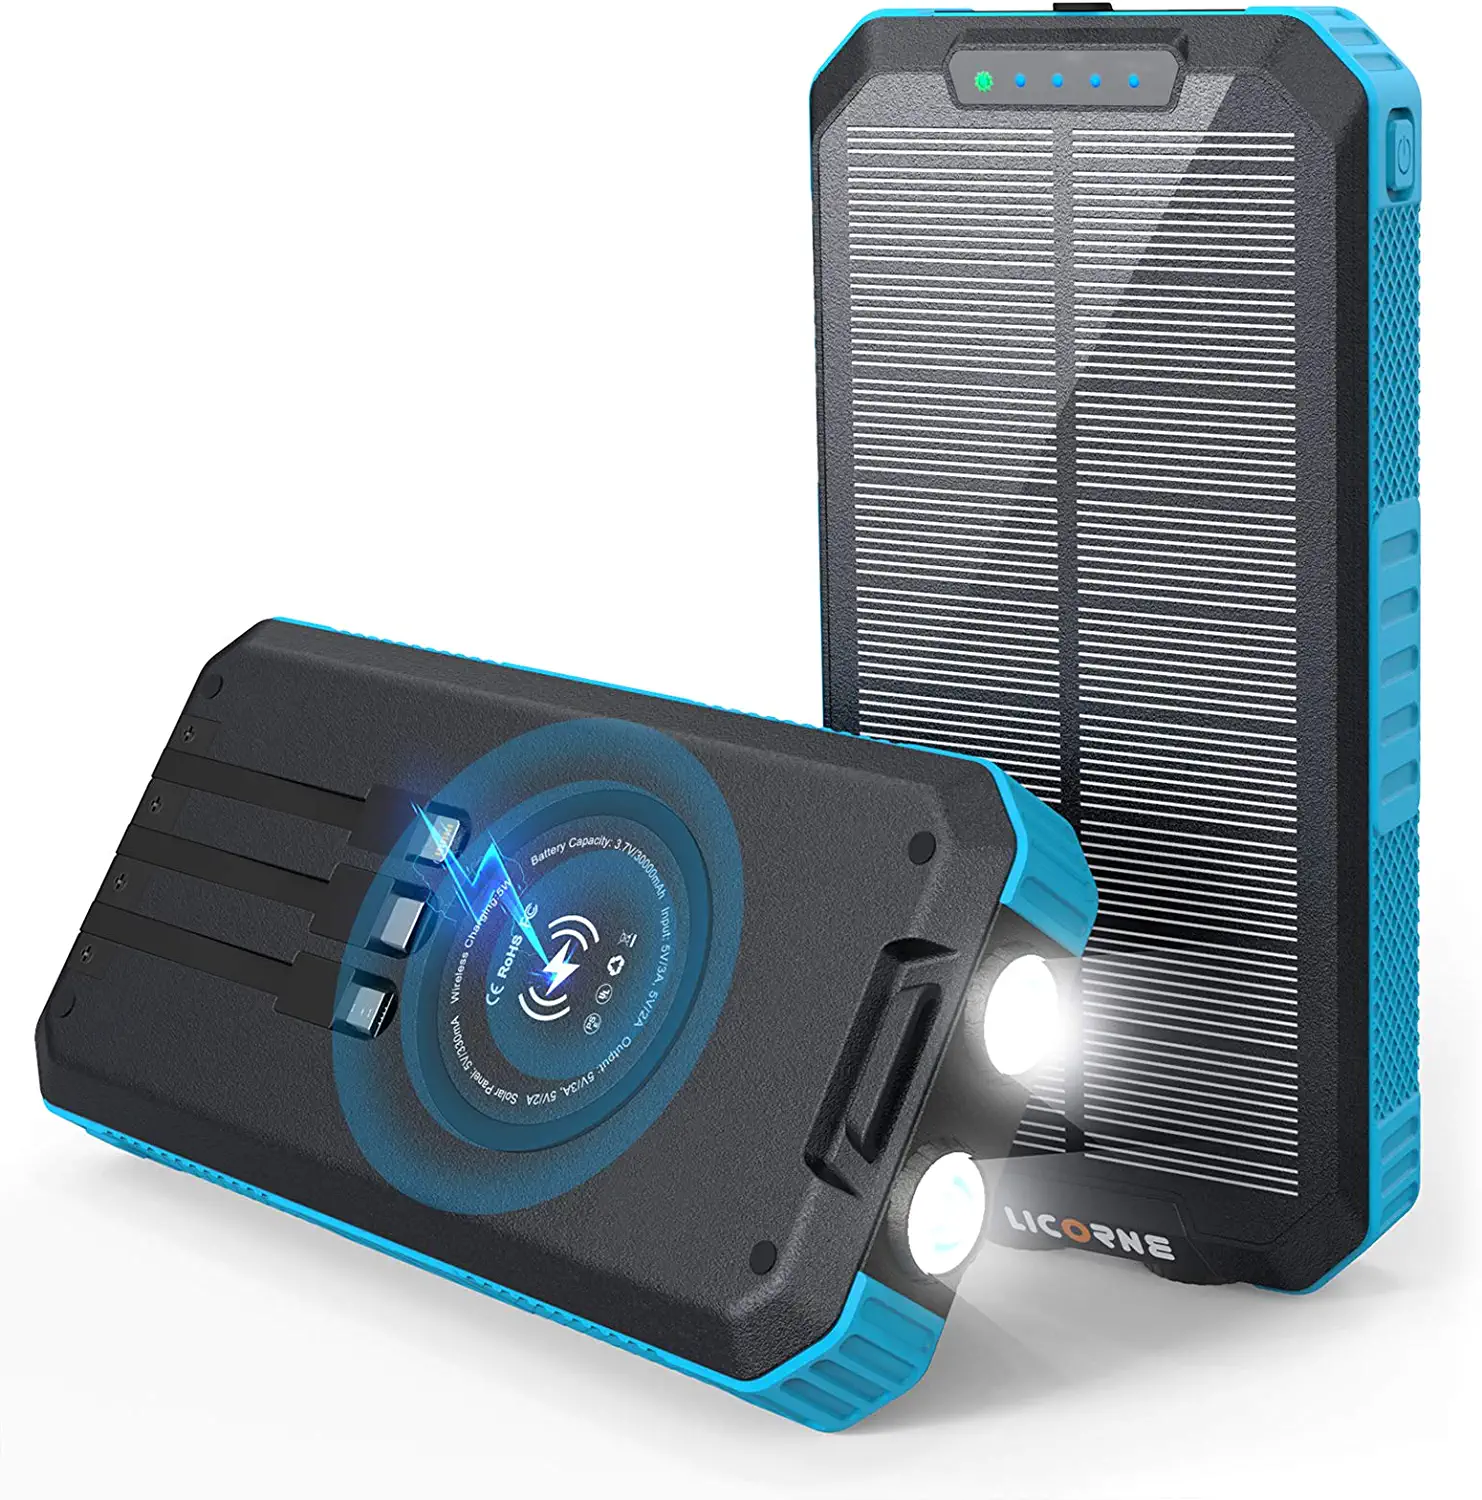 LICORNE Cable-Free Travel Solar Window Charger